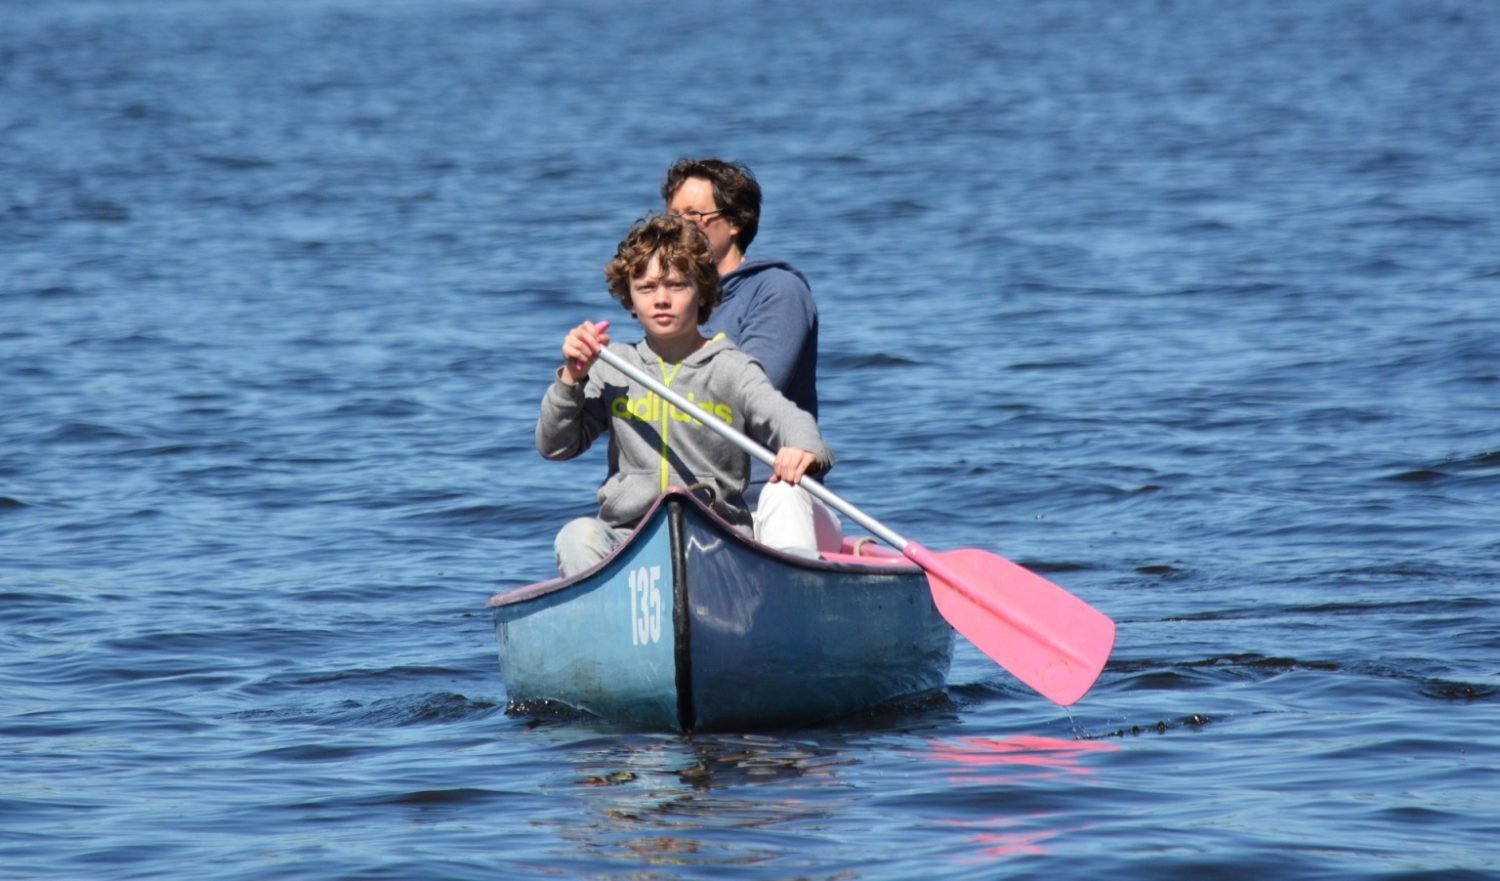 On a canoe, paddlers grip a single-bladed paddle, alternating strokes on ei...